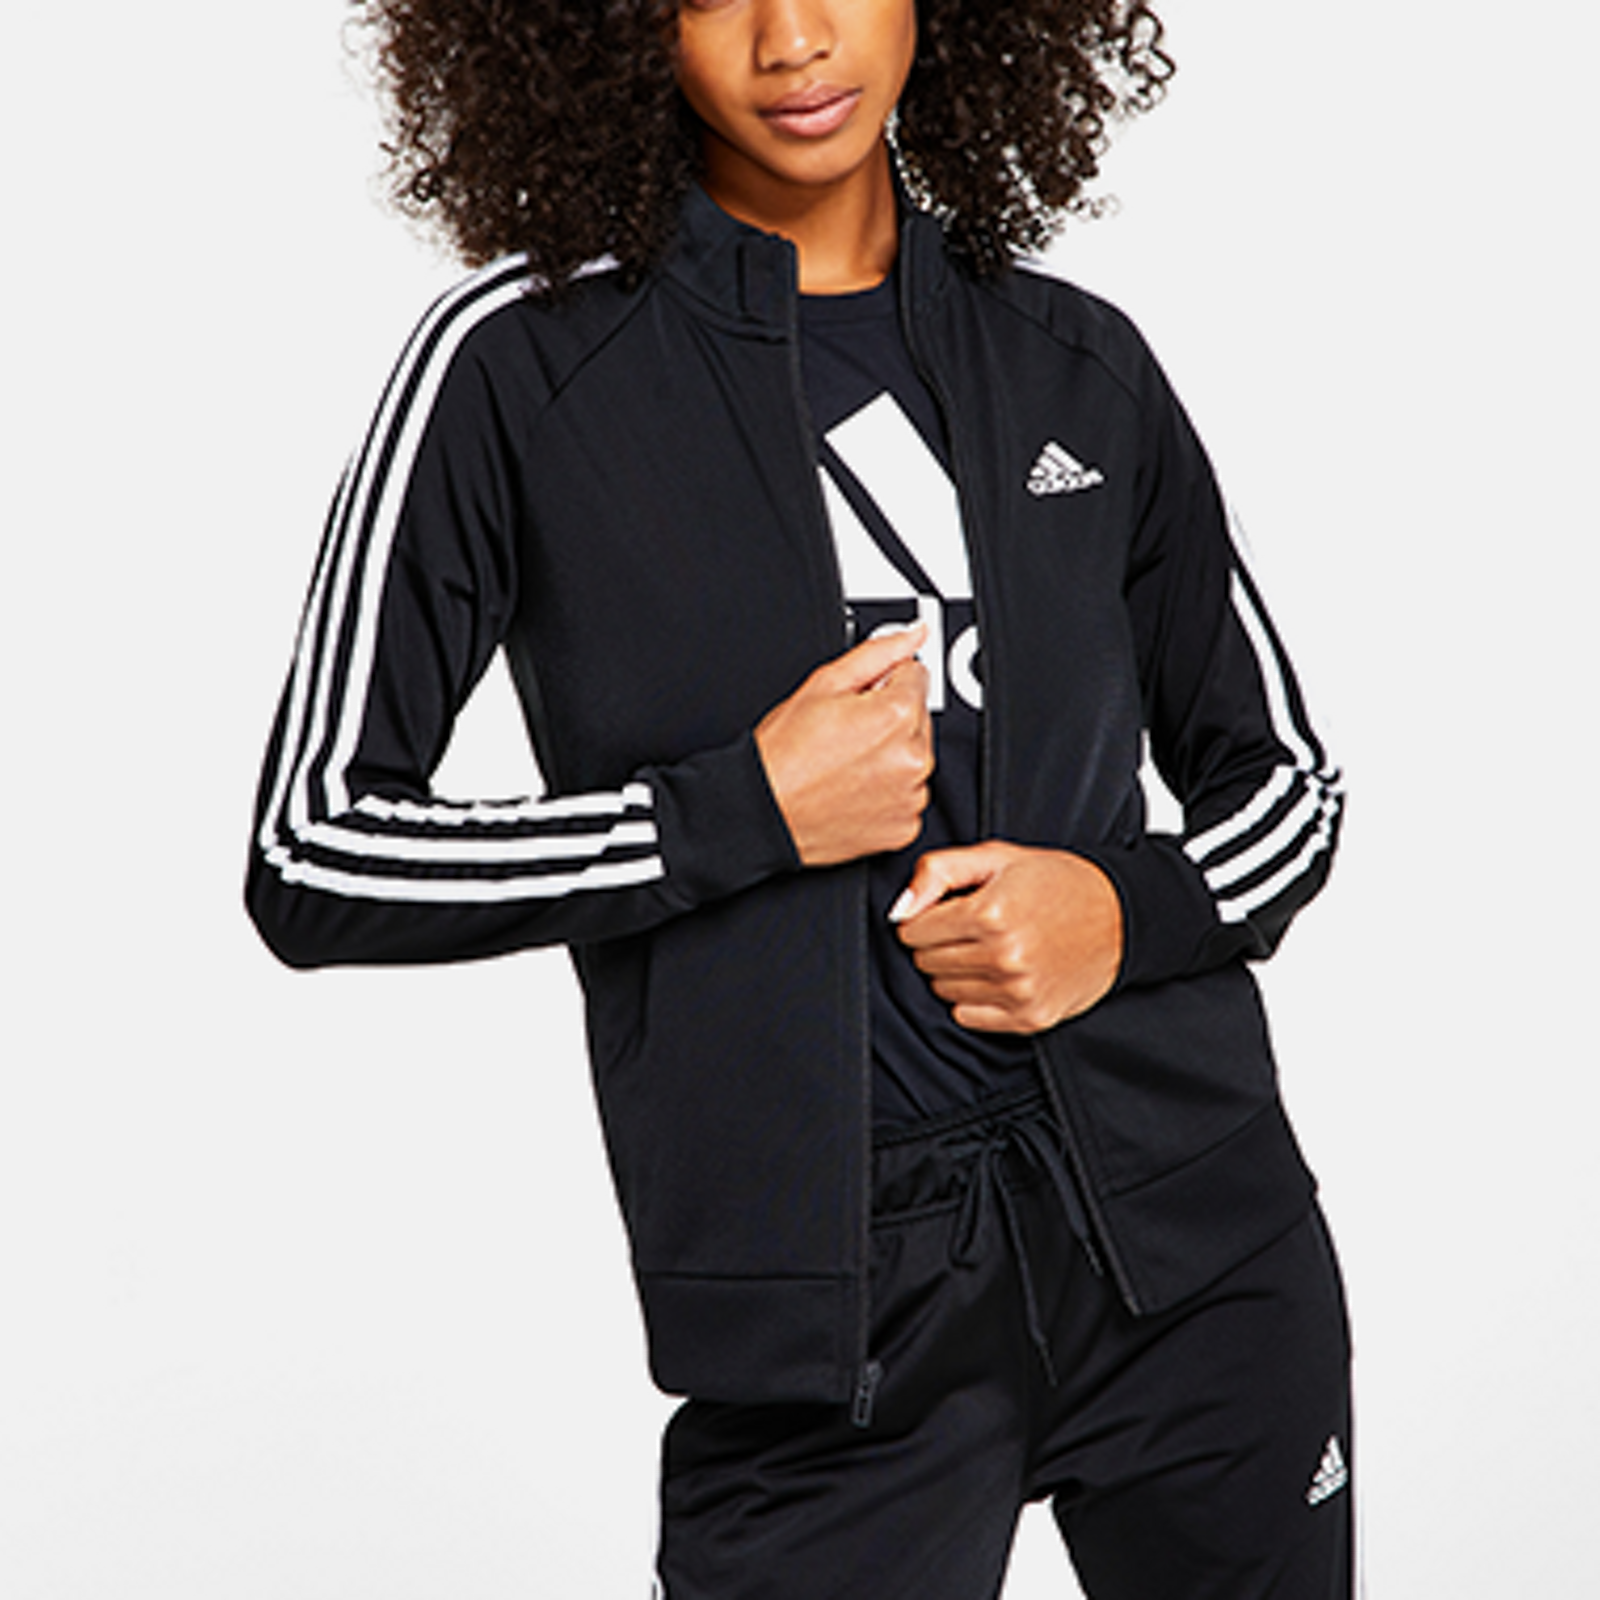 Oversized Workout Clothes: Women's Activewear & Athletic Wear - Macy's